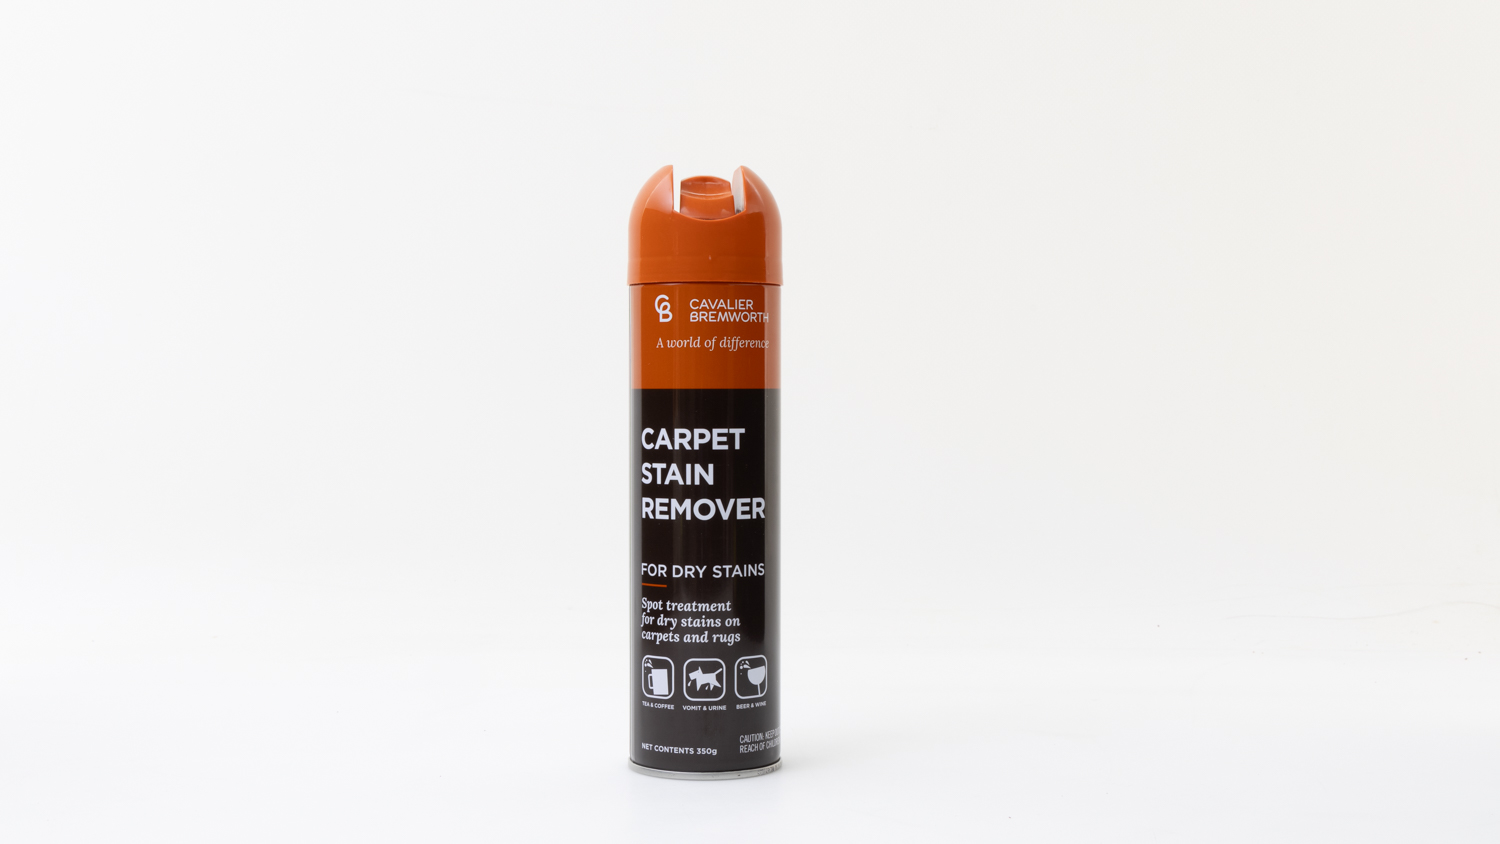 Cavalier Bremworth Carpet Stain Remover For Dry Stains carousel image